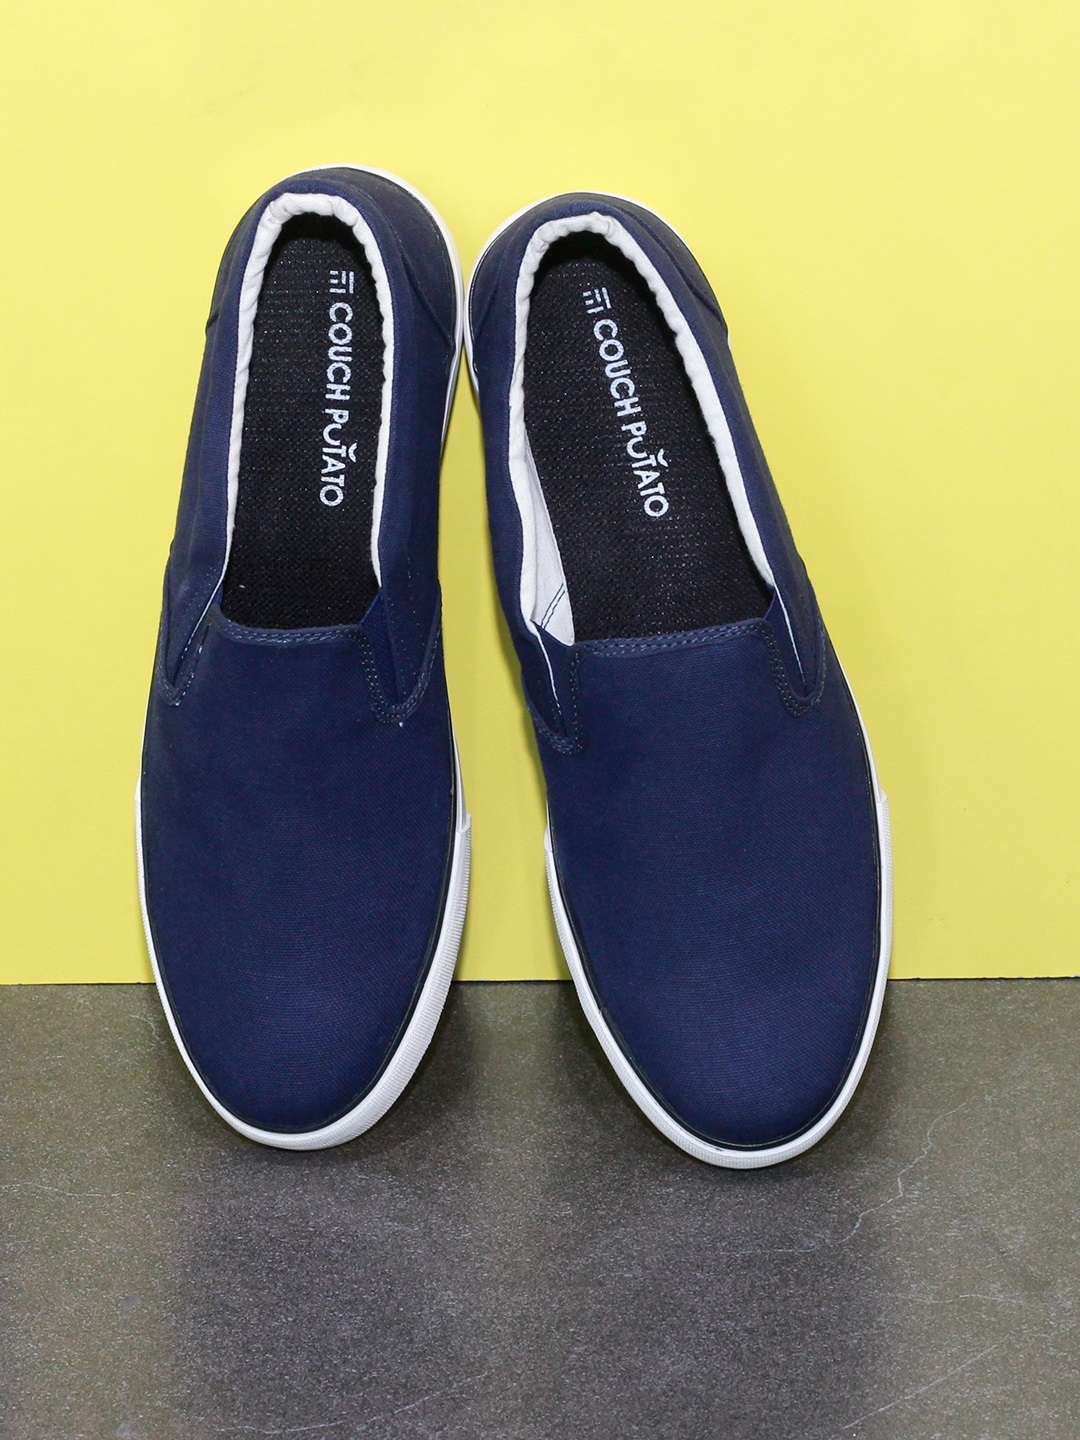 Buy Couch Potato Men Navy Blue Slip On Sneakers - Casual Shoes for Men ...